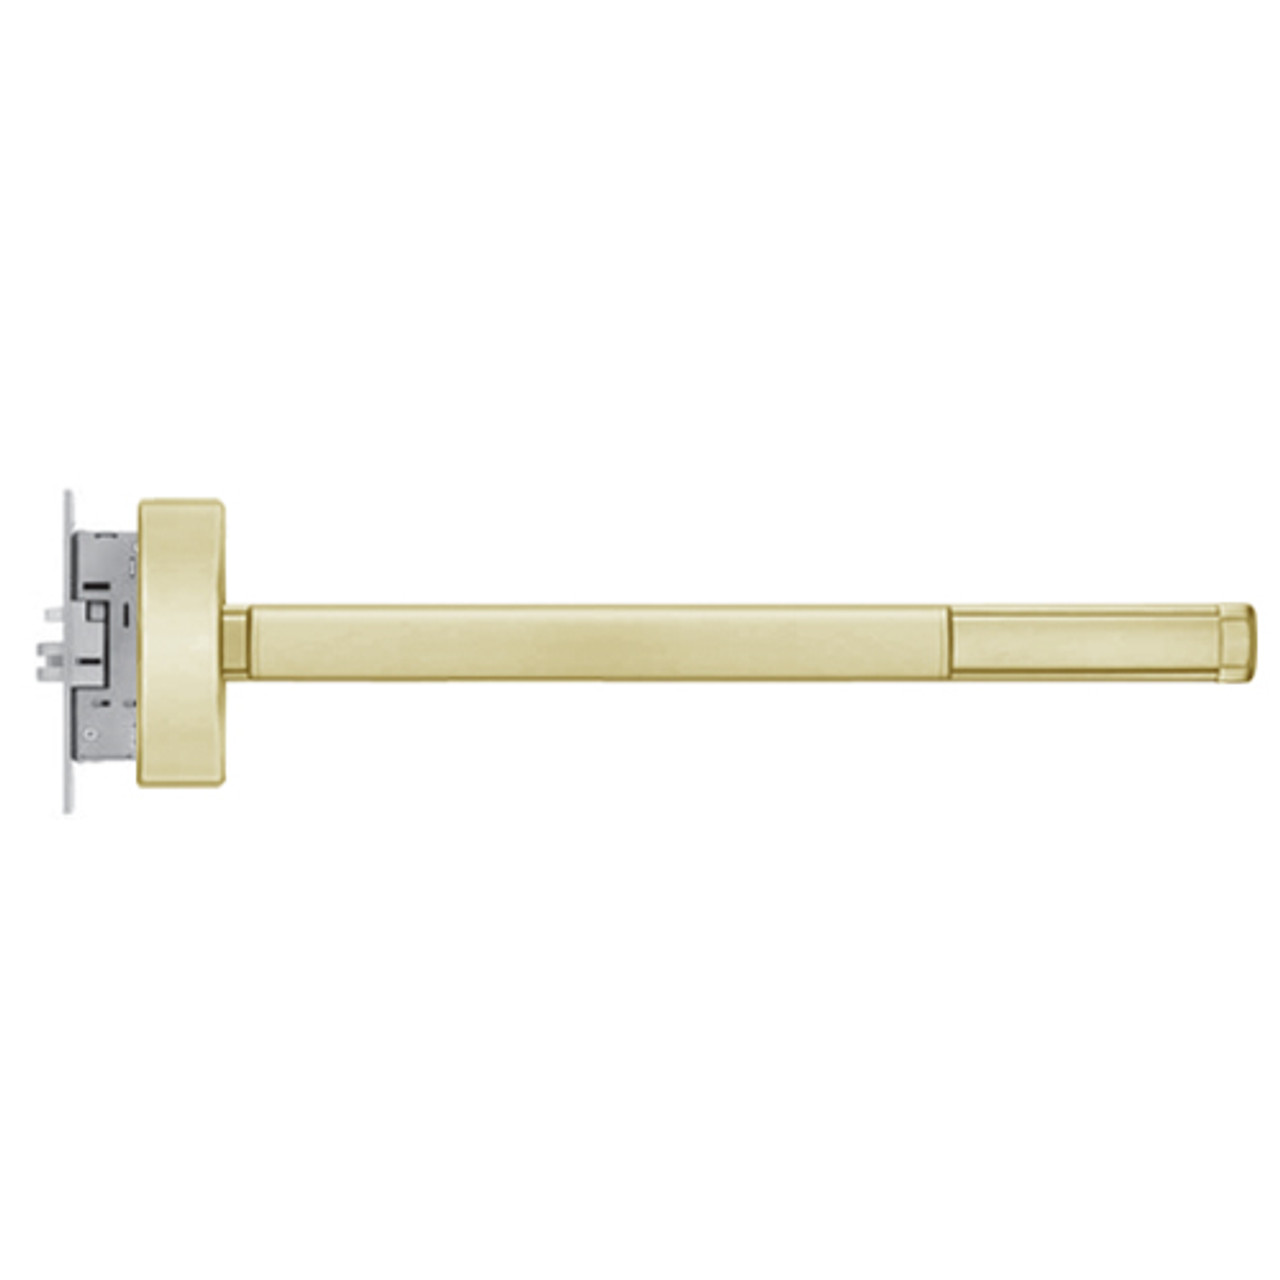 FL2305-LHR-606-48 PHI 2300 Series Fire Rated Apex Mortise Exit Device Prepped for Key Controls Thumb Piece in Satin Brass Finish